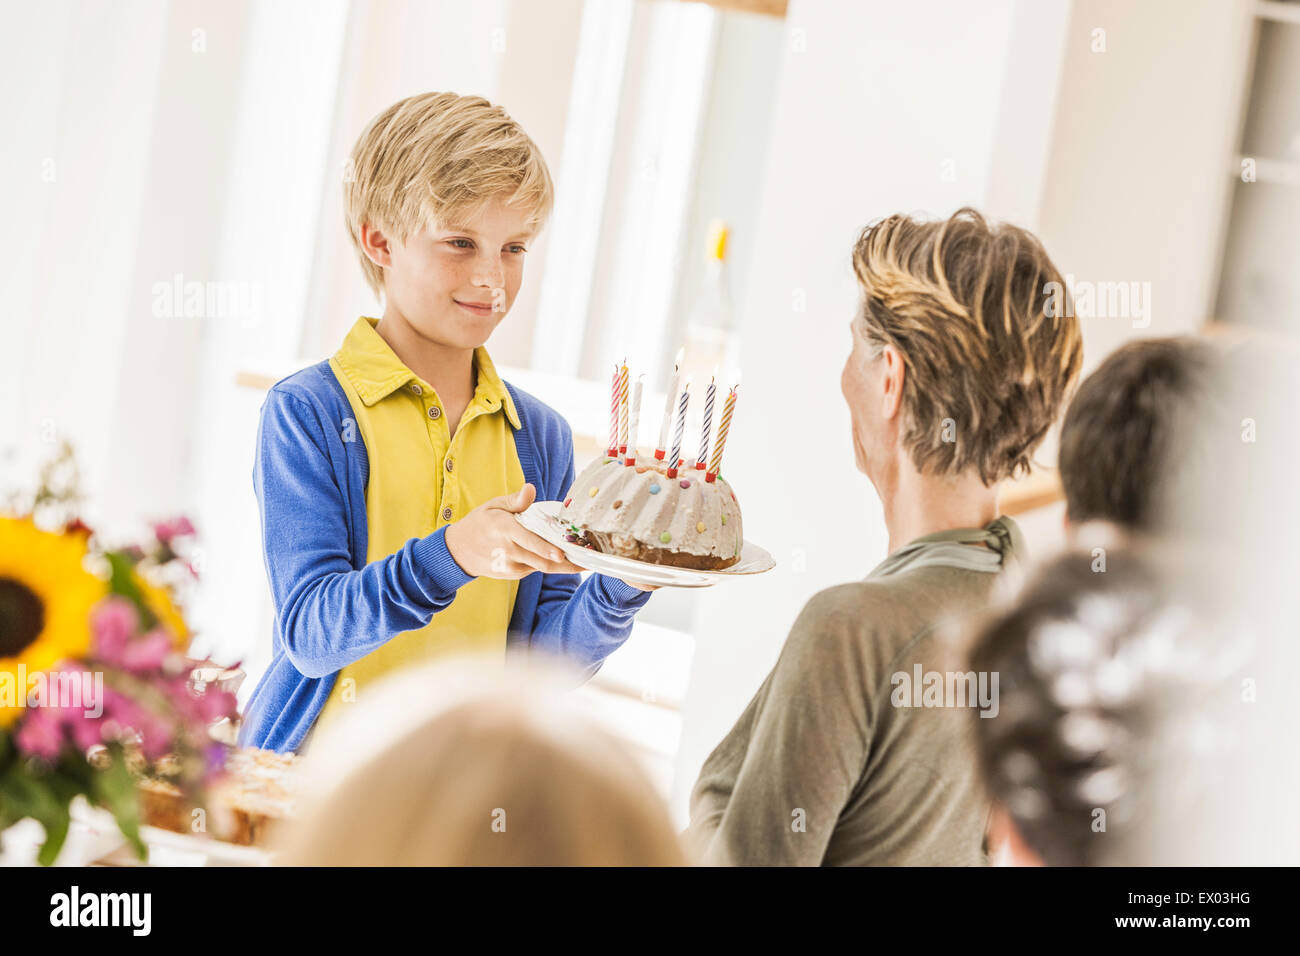 Boy handing grandmother birthday cake at party in dining room Stock Photo